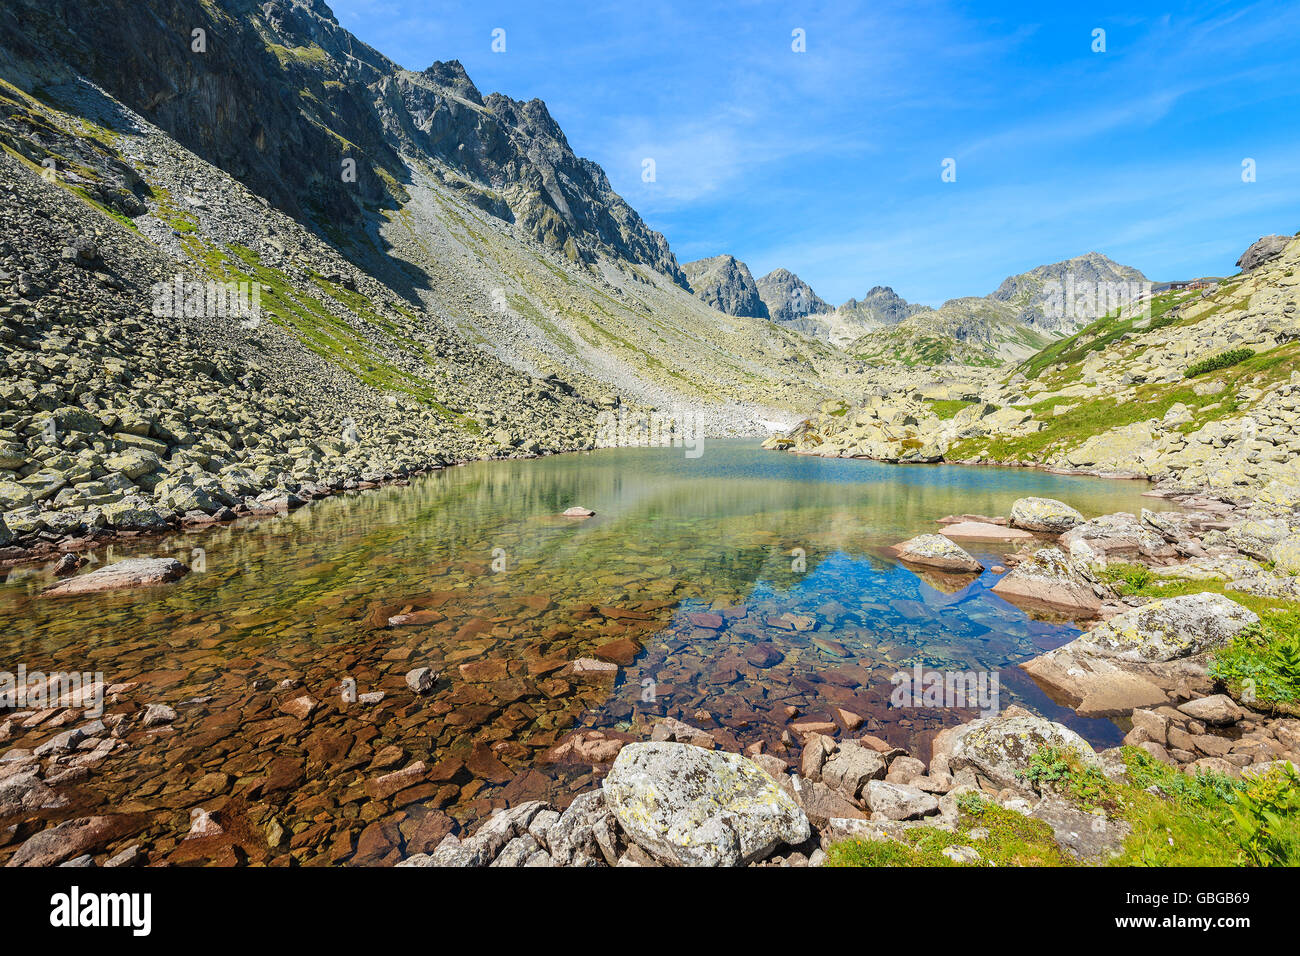 View of alpine lake in summer landscape of Starolesna valley, High Tatra Mountains, Slovakia Stock Photo